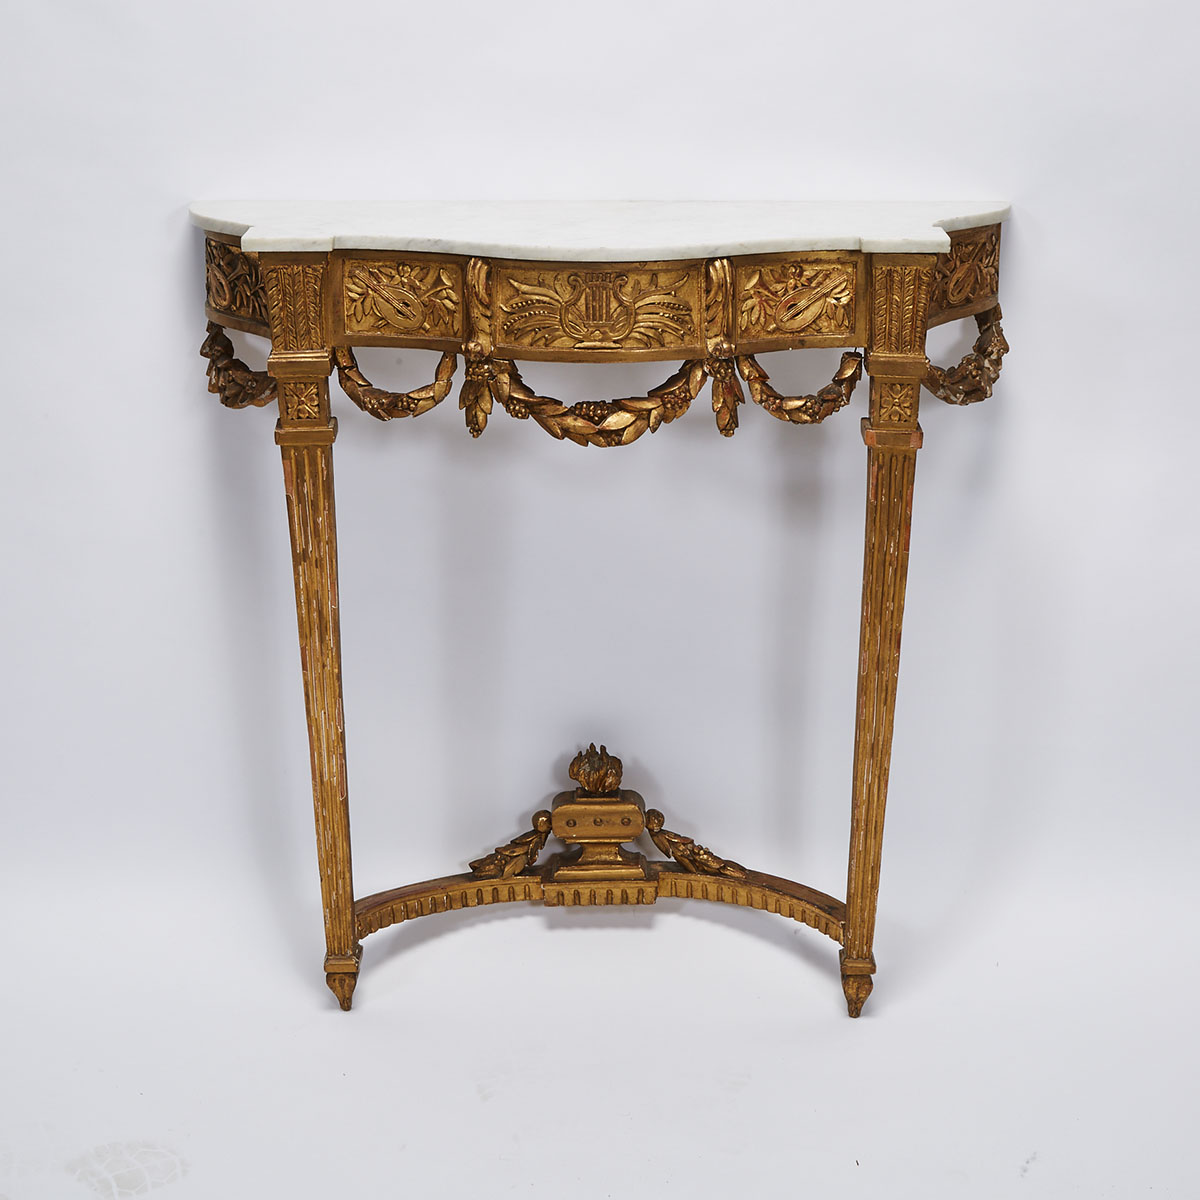 Florentine Neoclassical Giltwood Console Table, early 20th century